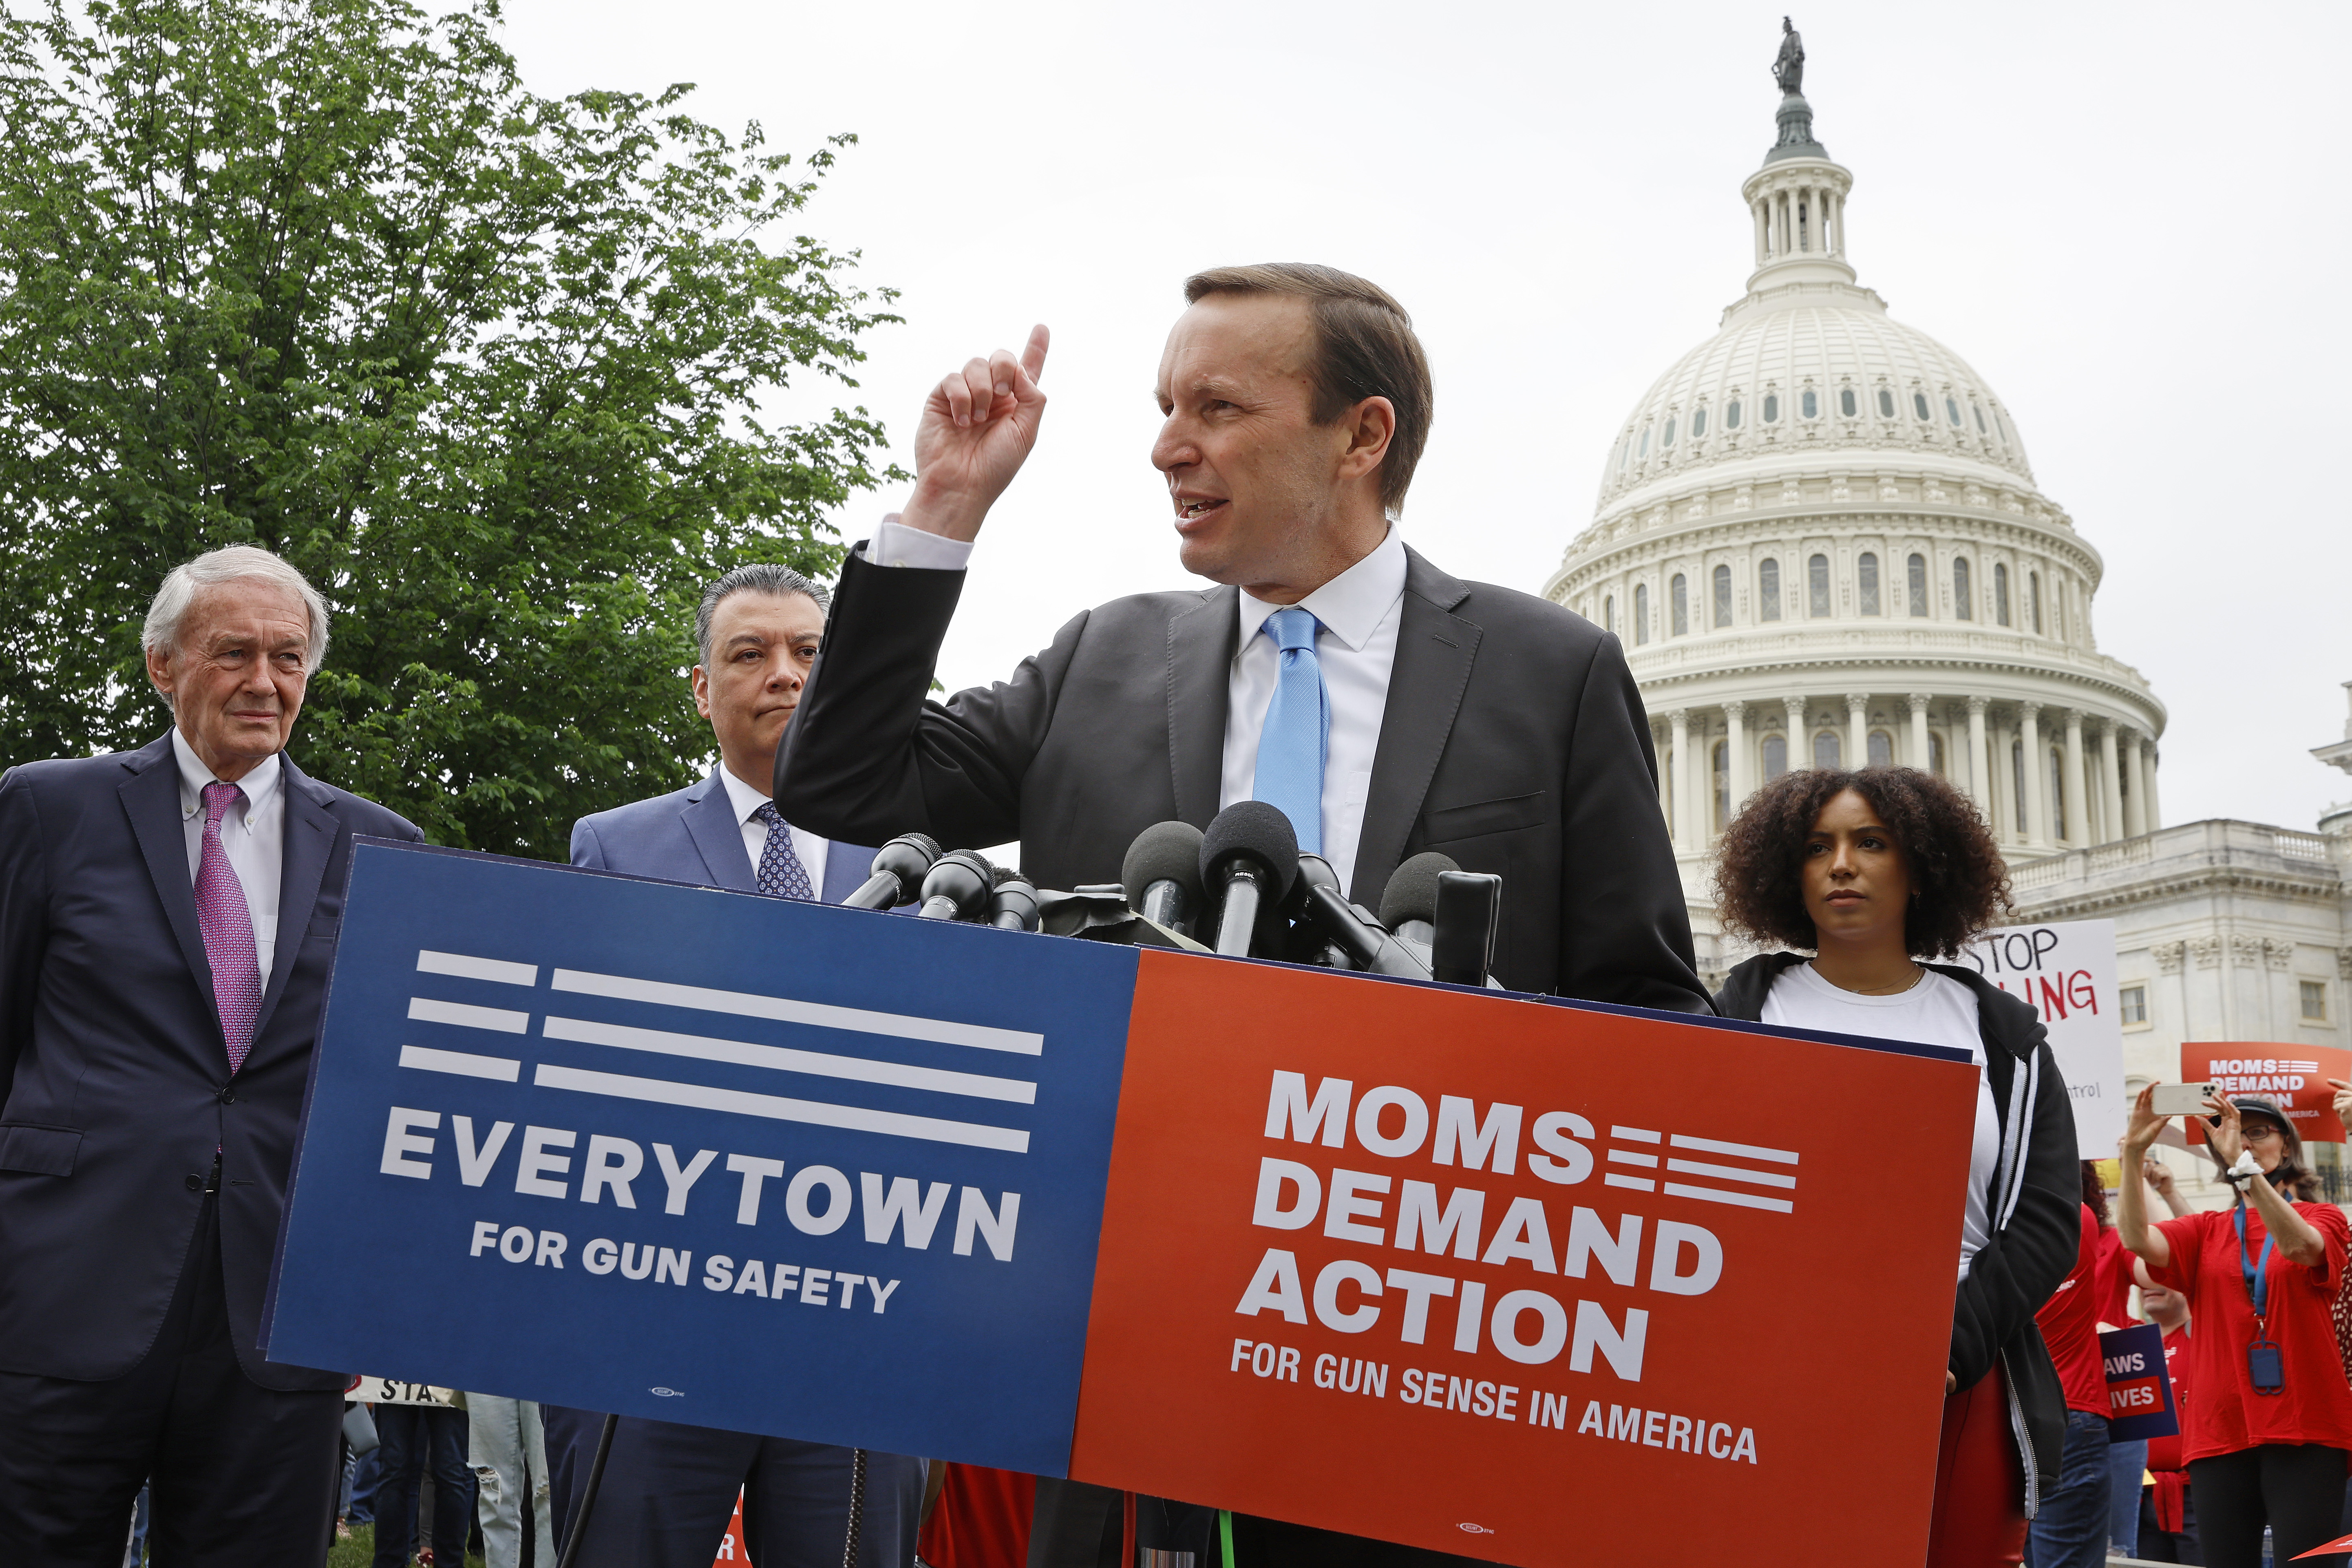 A politician gestures from behind a lectern that reads “Everytown for gun safety” and “Moms demand action for gun sense in America.” The Capitol dome is in the background.